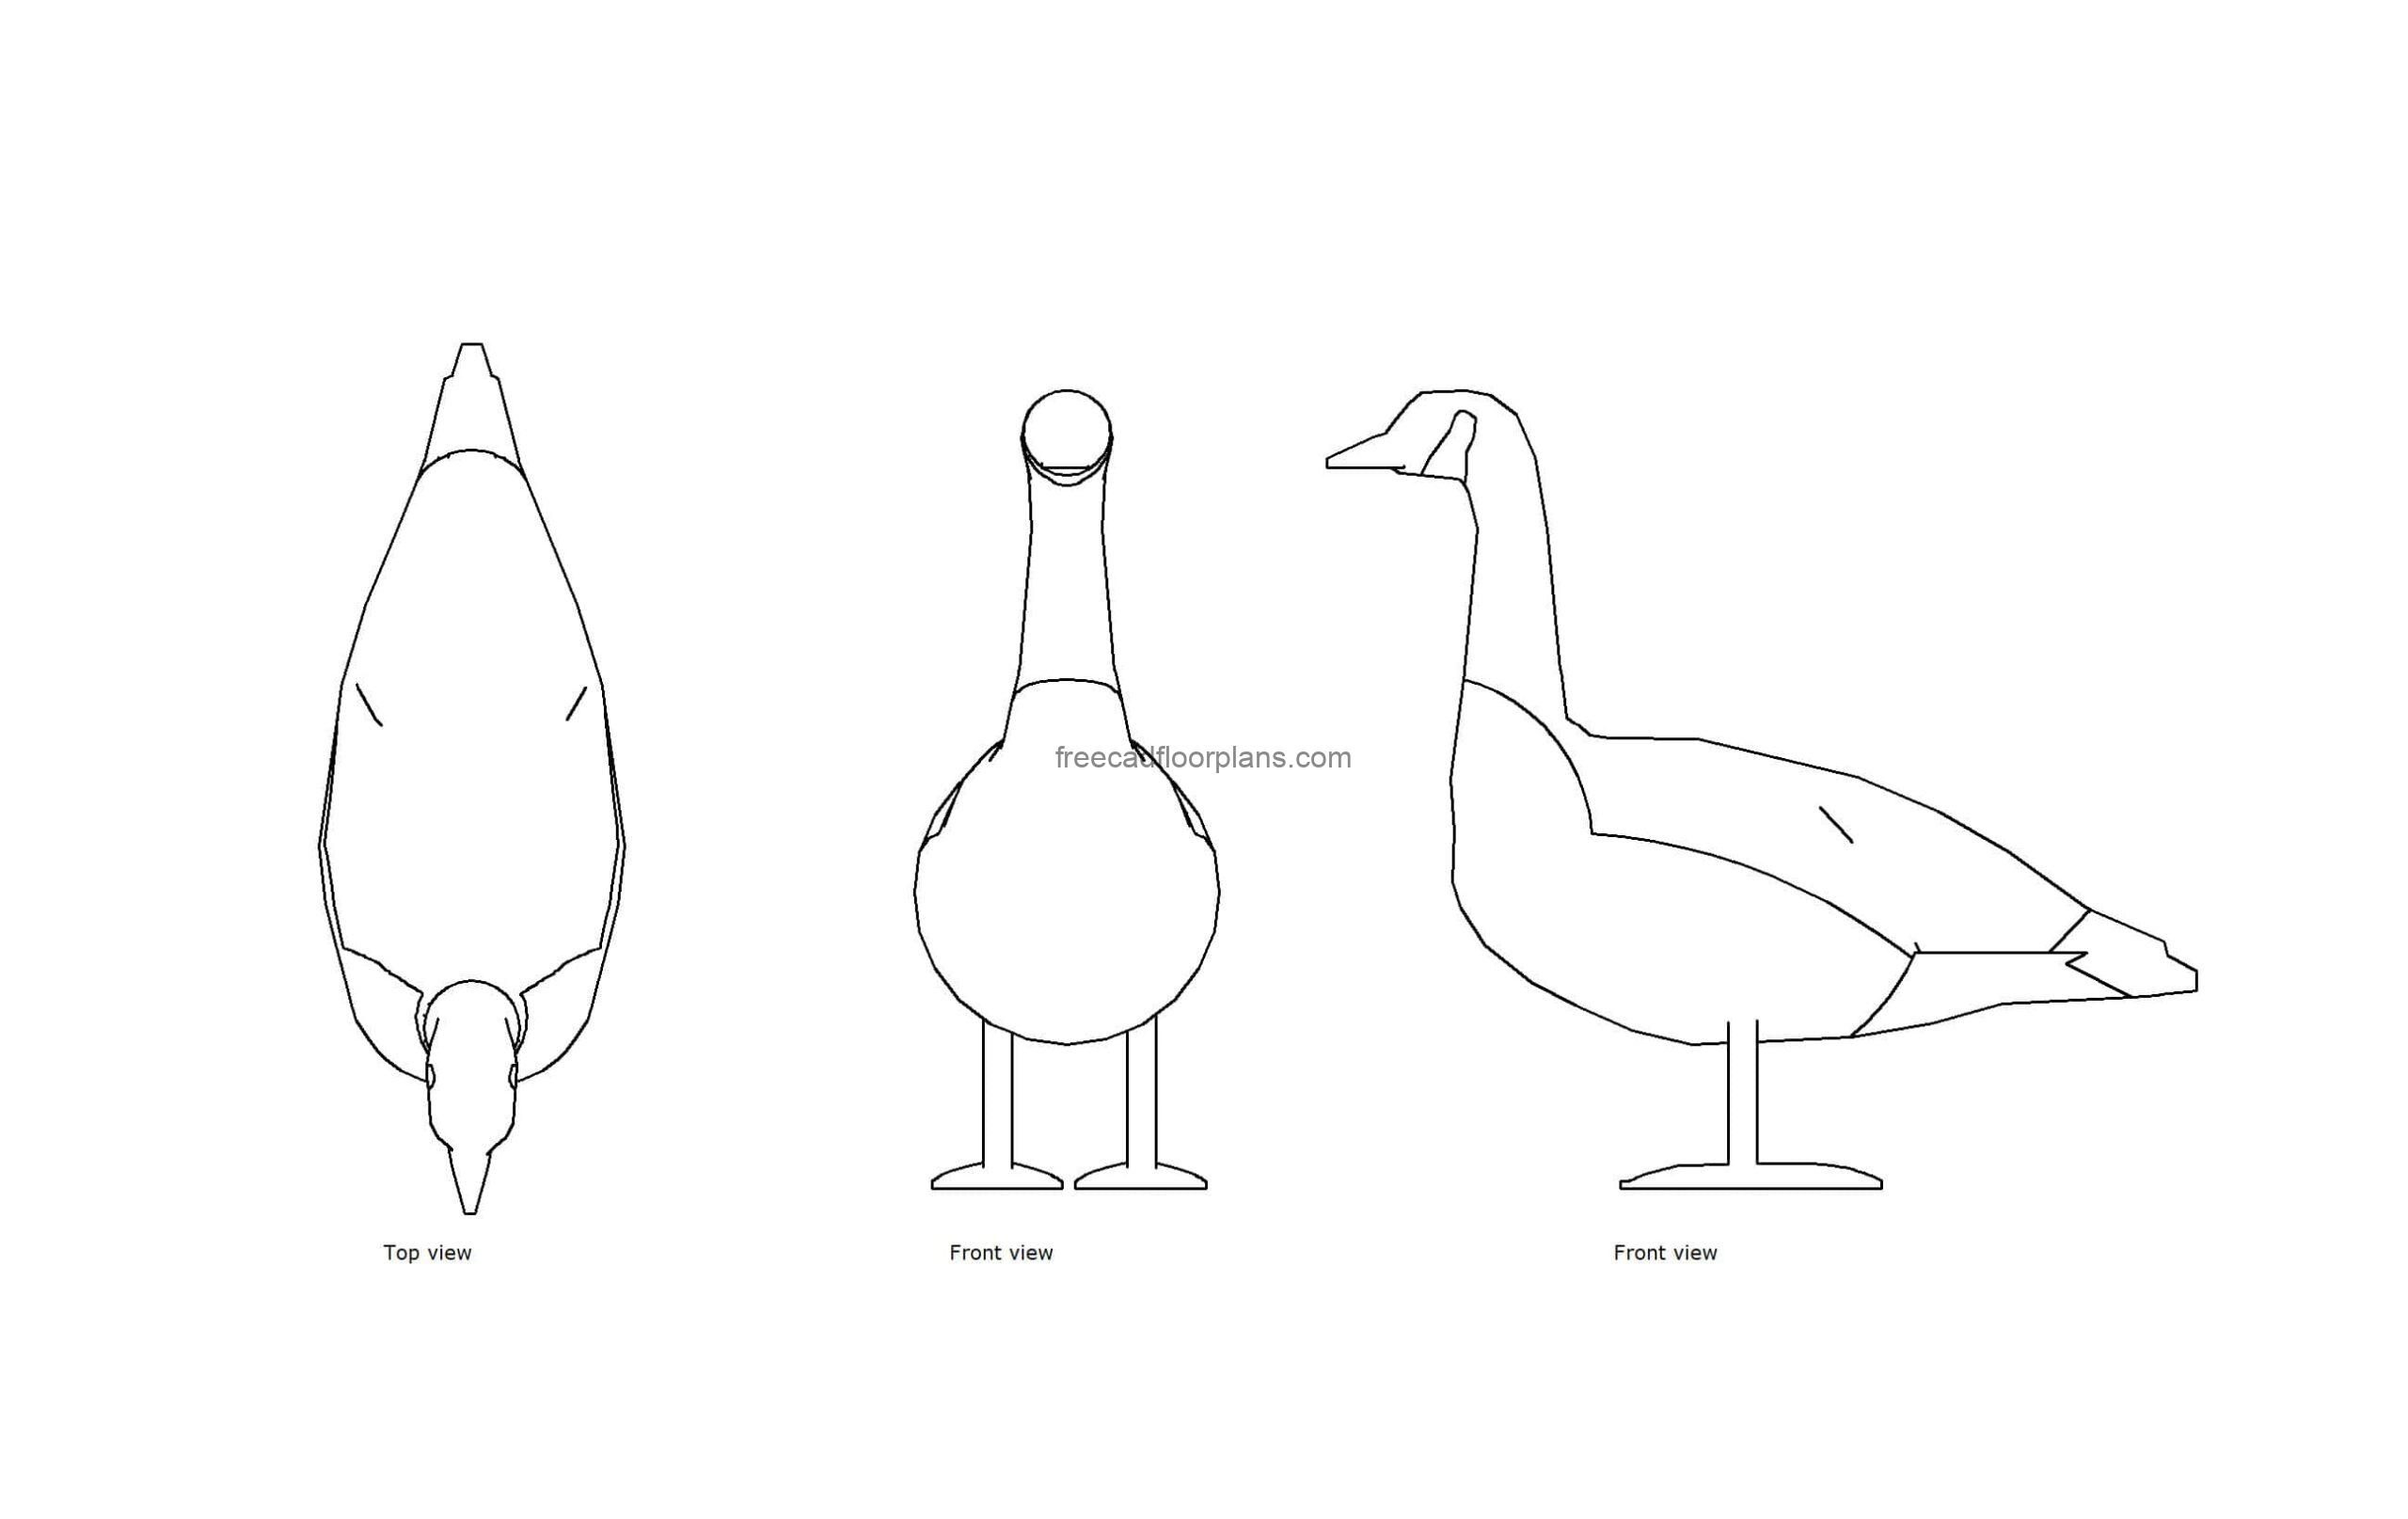 autocad drawing of a goose, plan and elevation 2d views, dwg file free for download